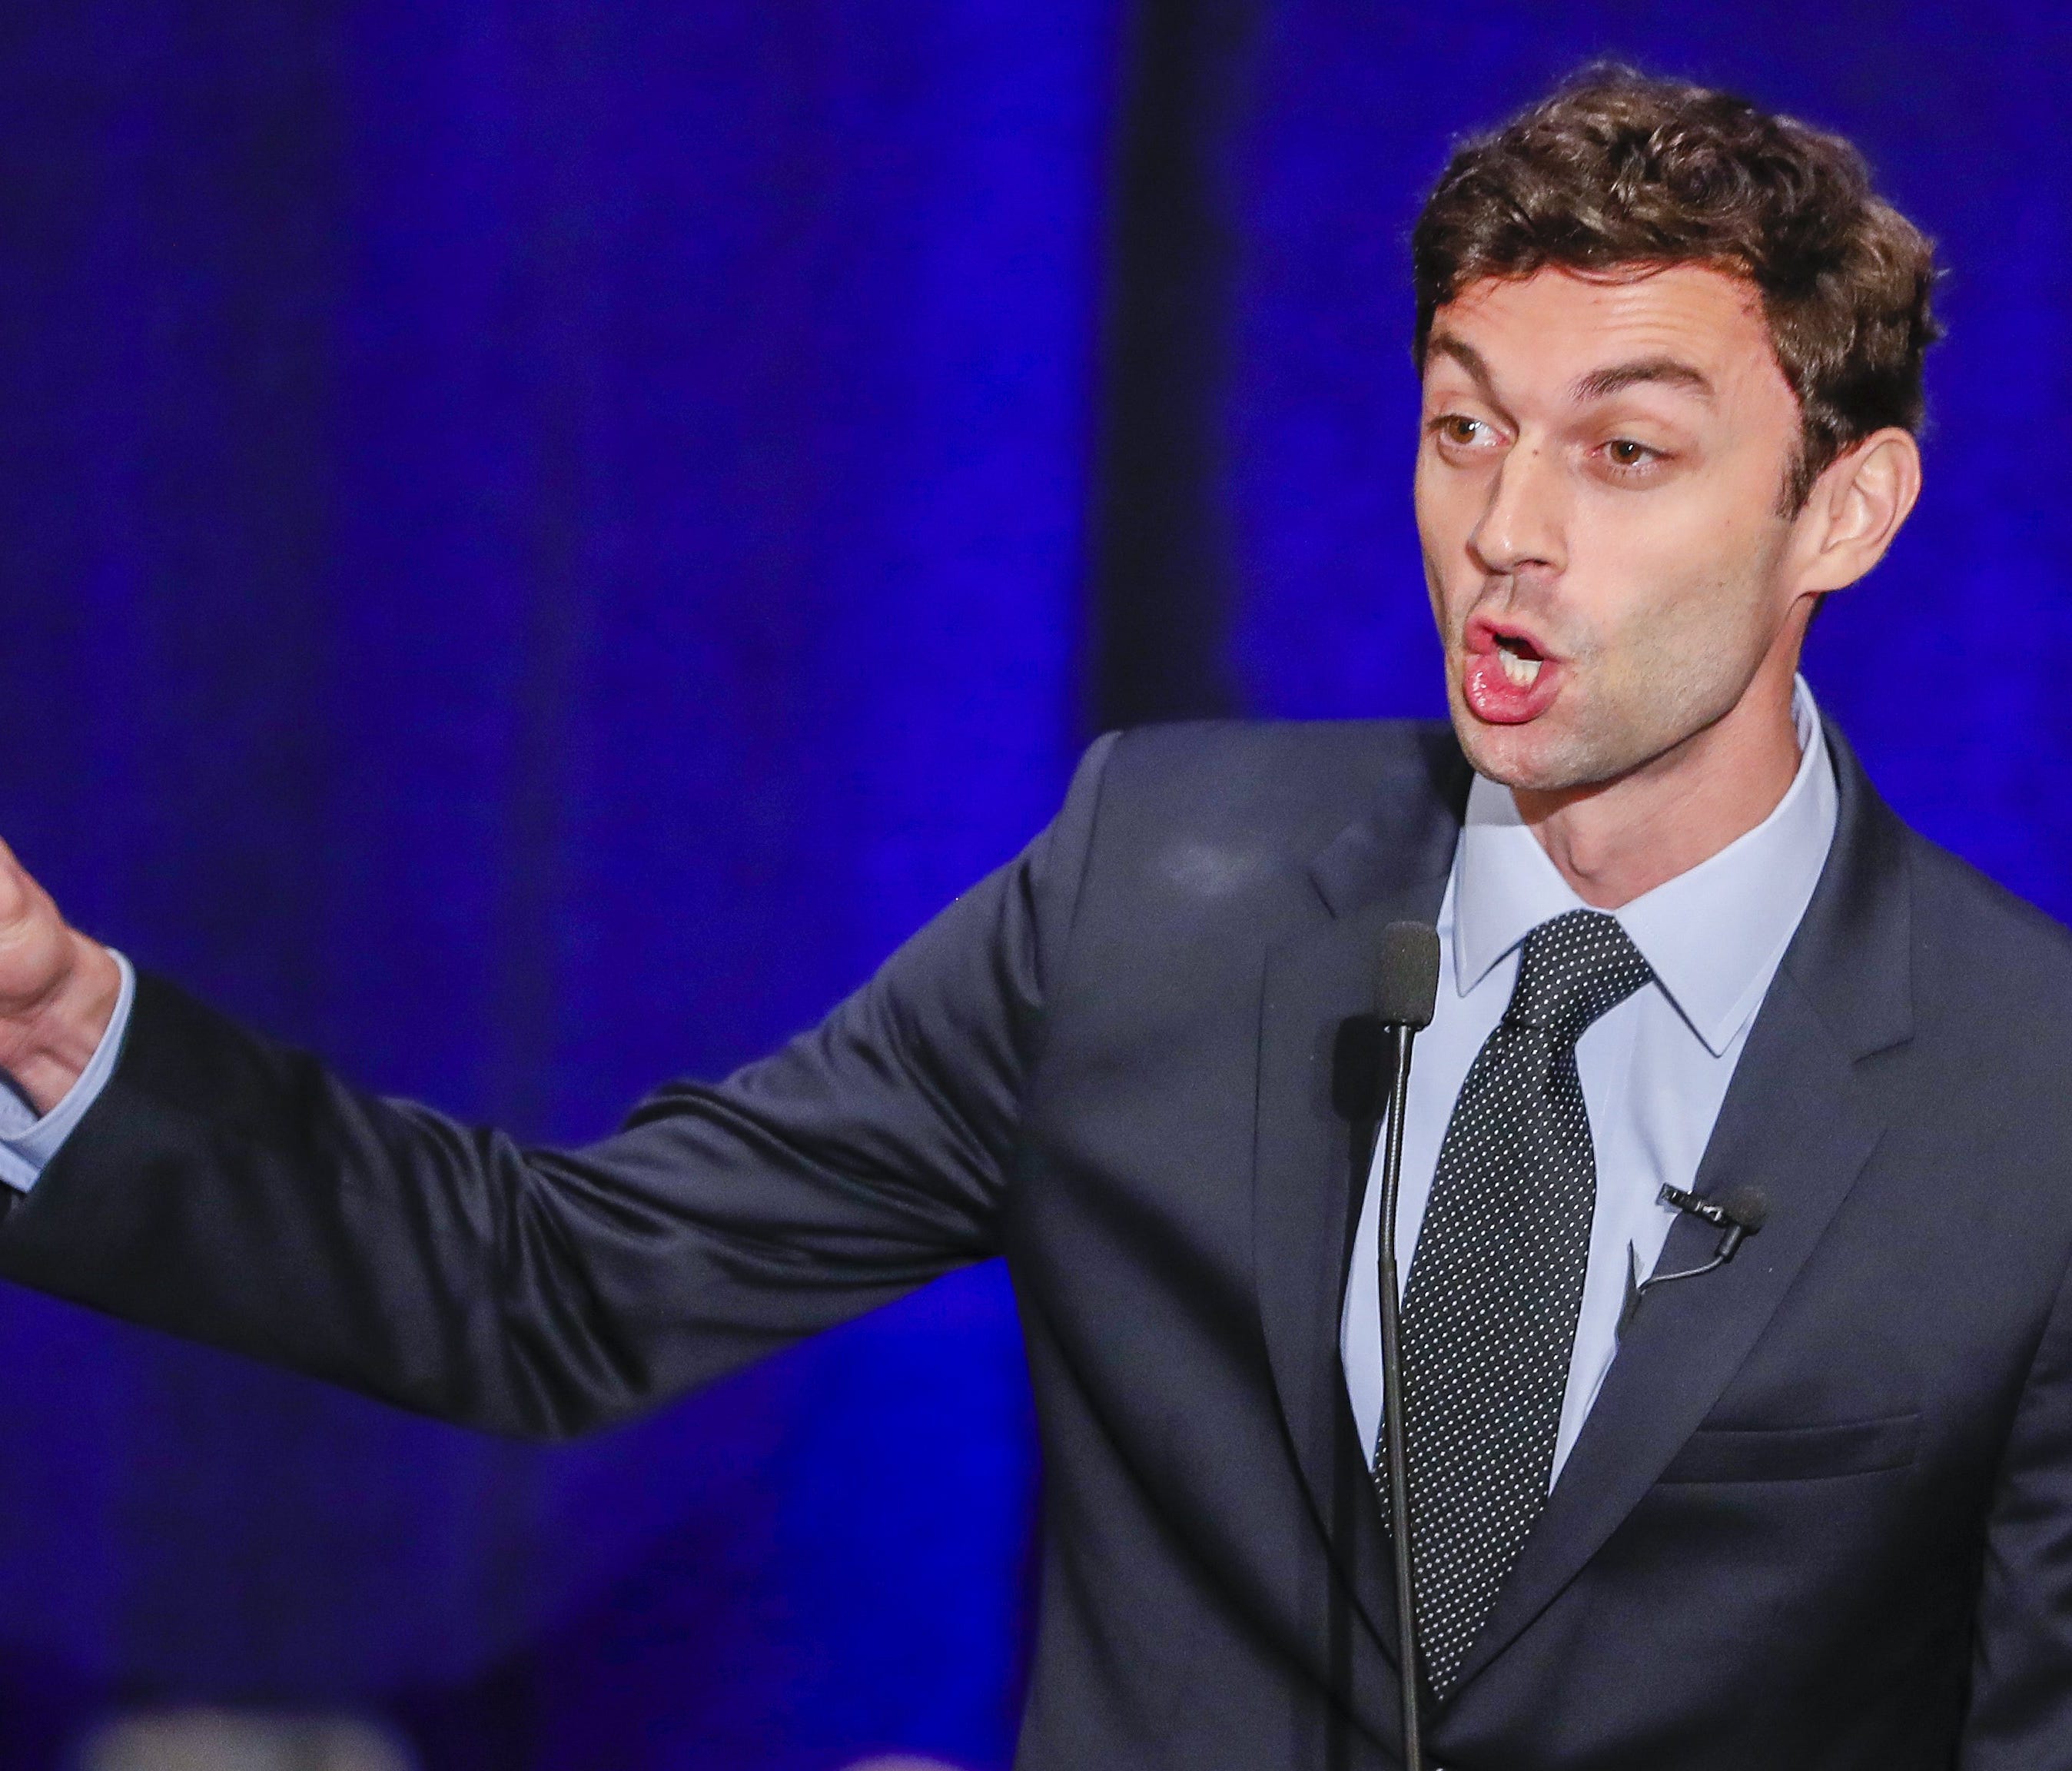 Democratic candidate Jon Ossoff speaks to supporters during a special election night party in Atlanta. Ossoff was one of 18 candidates who ran in Tuesday's special election to fill Georgia's 6th congressional district seat previously held by Health a